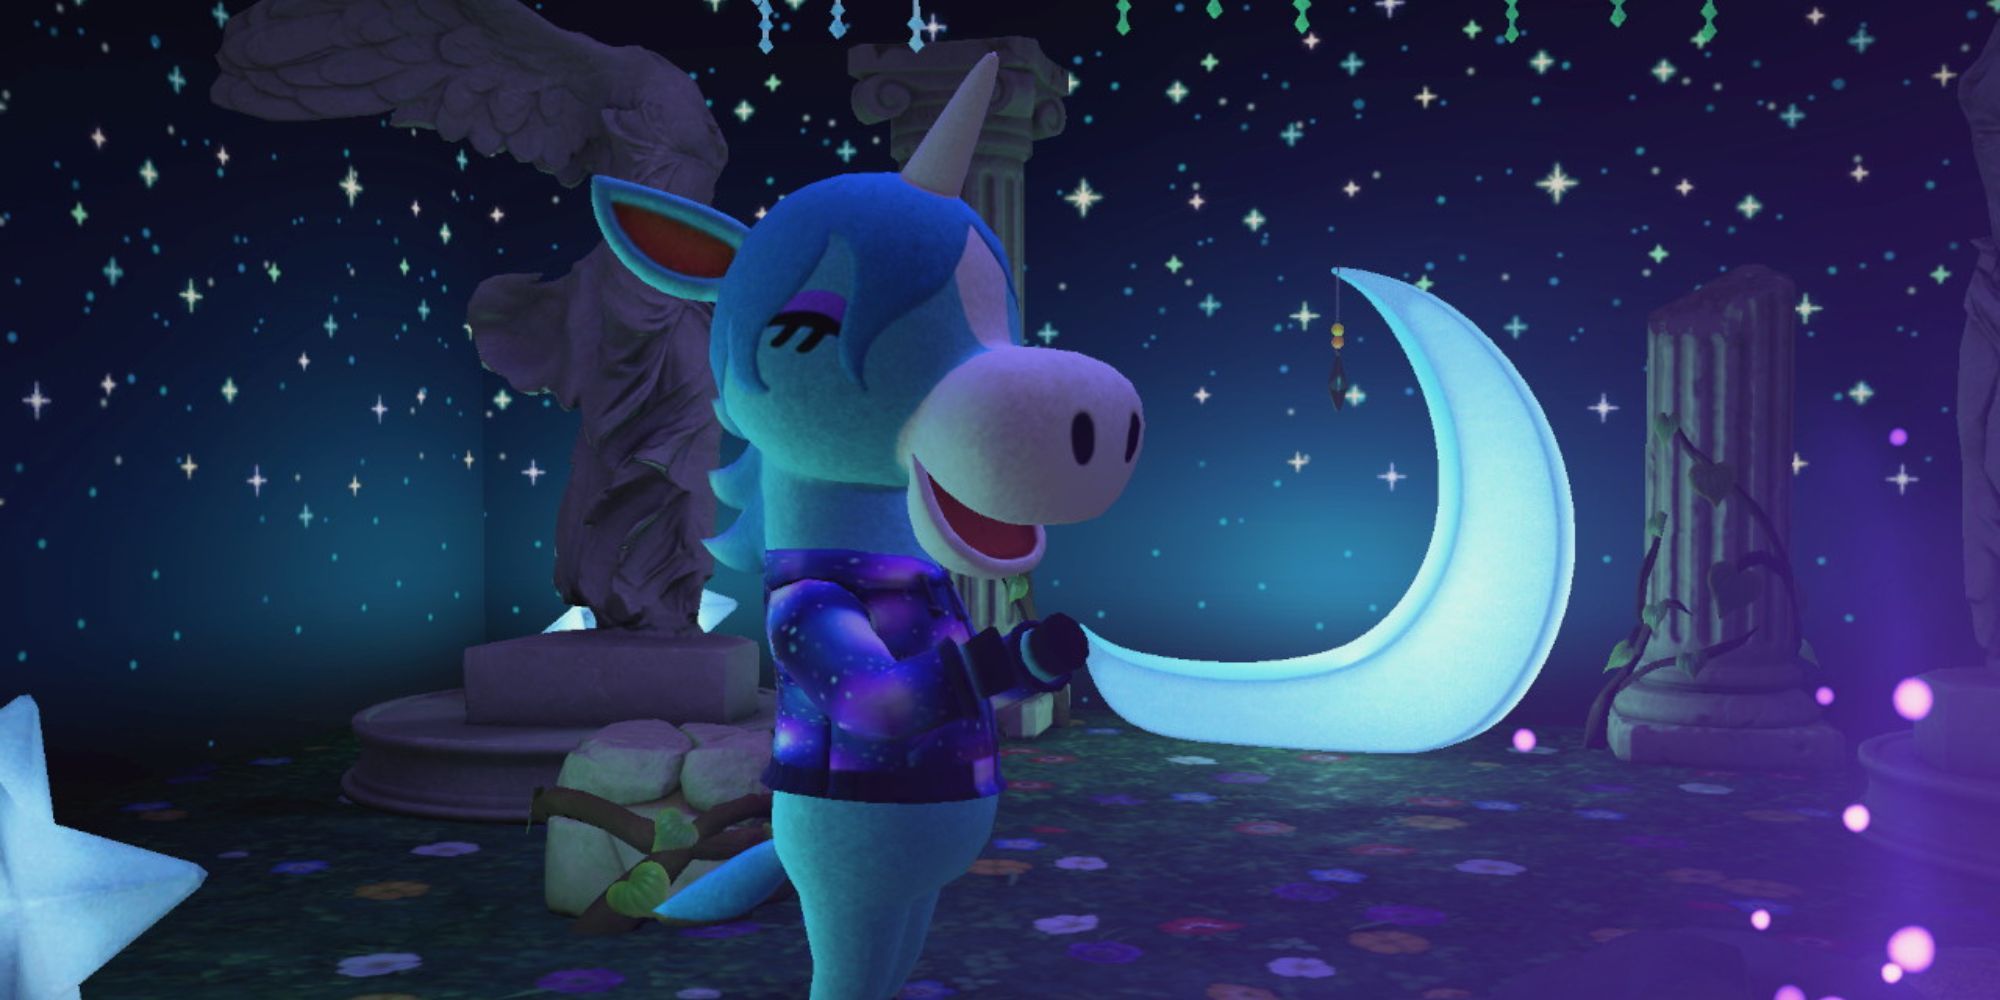 Julian stands by a crescent moon in his house